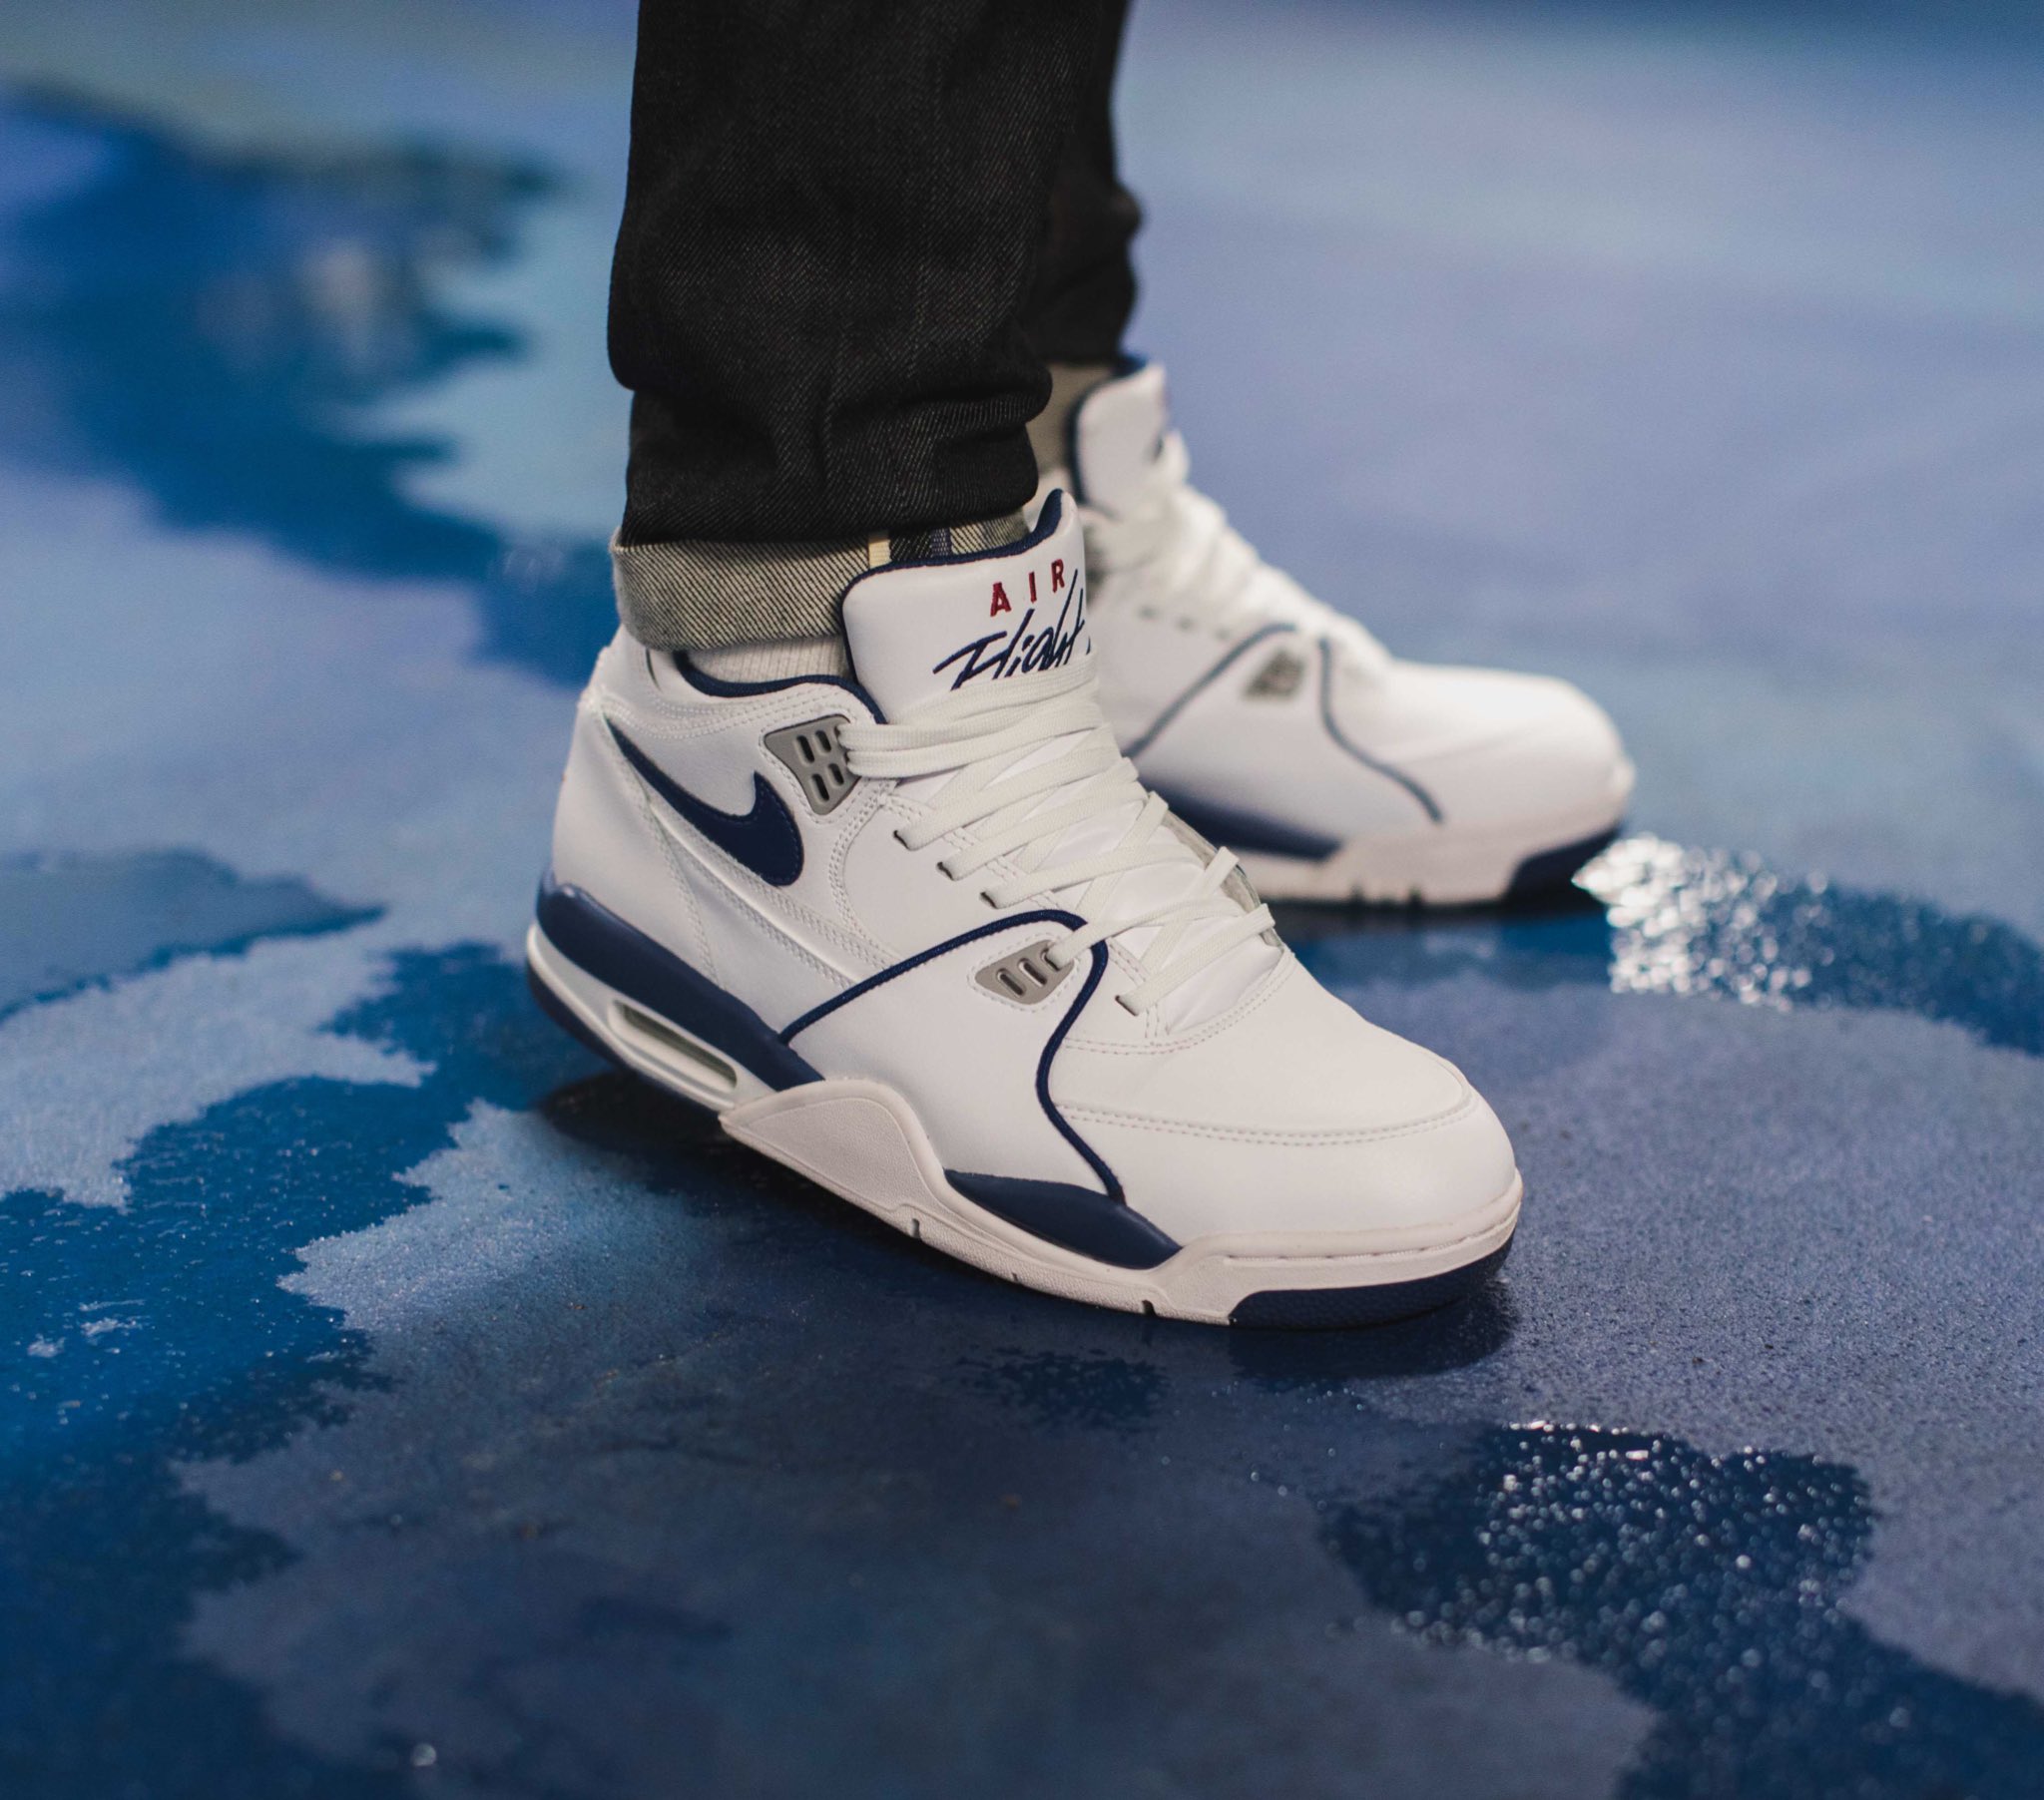 Sneaker Deals GB on Twitter: "Ad: The retro Nike Air Flight '89 OG 'True Blue' just reduced from £105 to ONLY Code “ASOSSALEON” here https://t.co/qGs2G5AF6h UK5.5-13 https://t.co/NvwZioNPc4" / Twitter